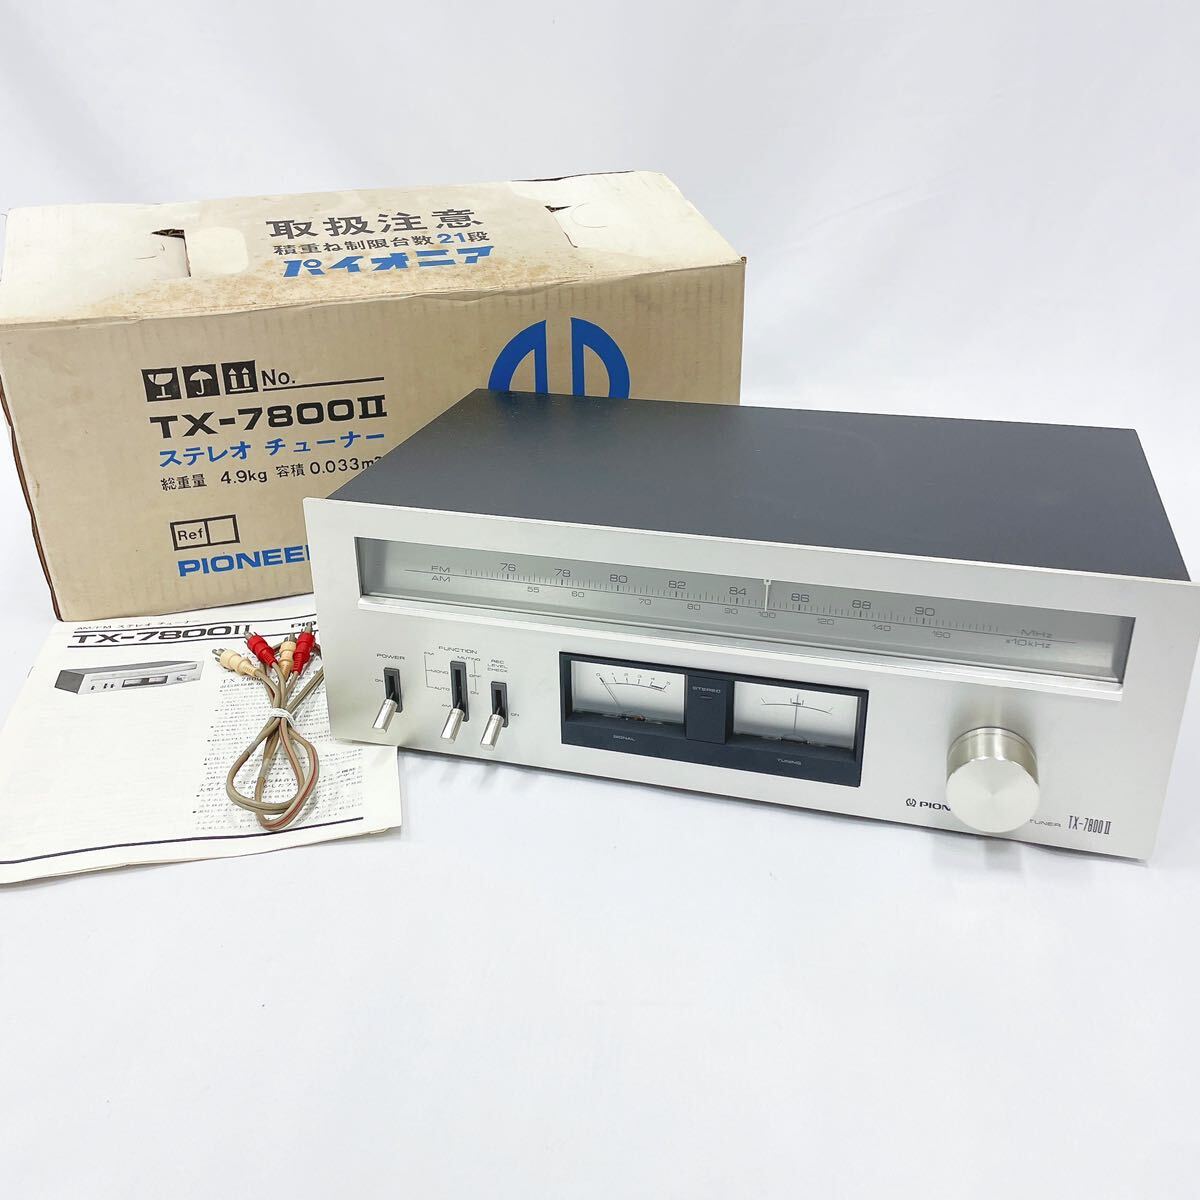  electrification has confirmed PIONEER Pioneer TX-7800Ⅱ AM/FM stereo tuner audio equipment manual box attaching R.04100